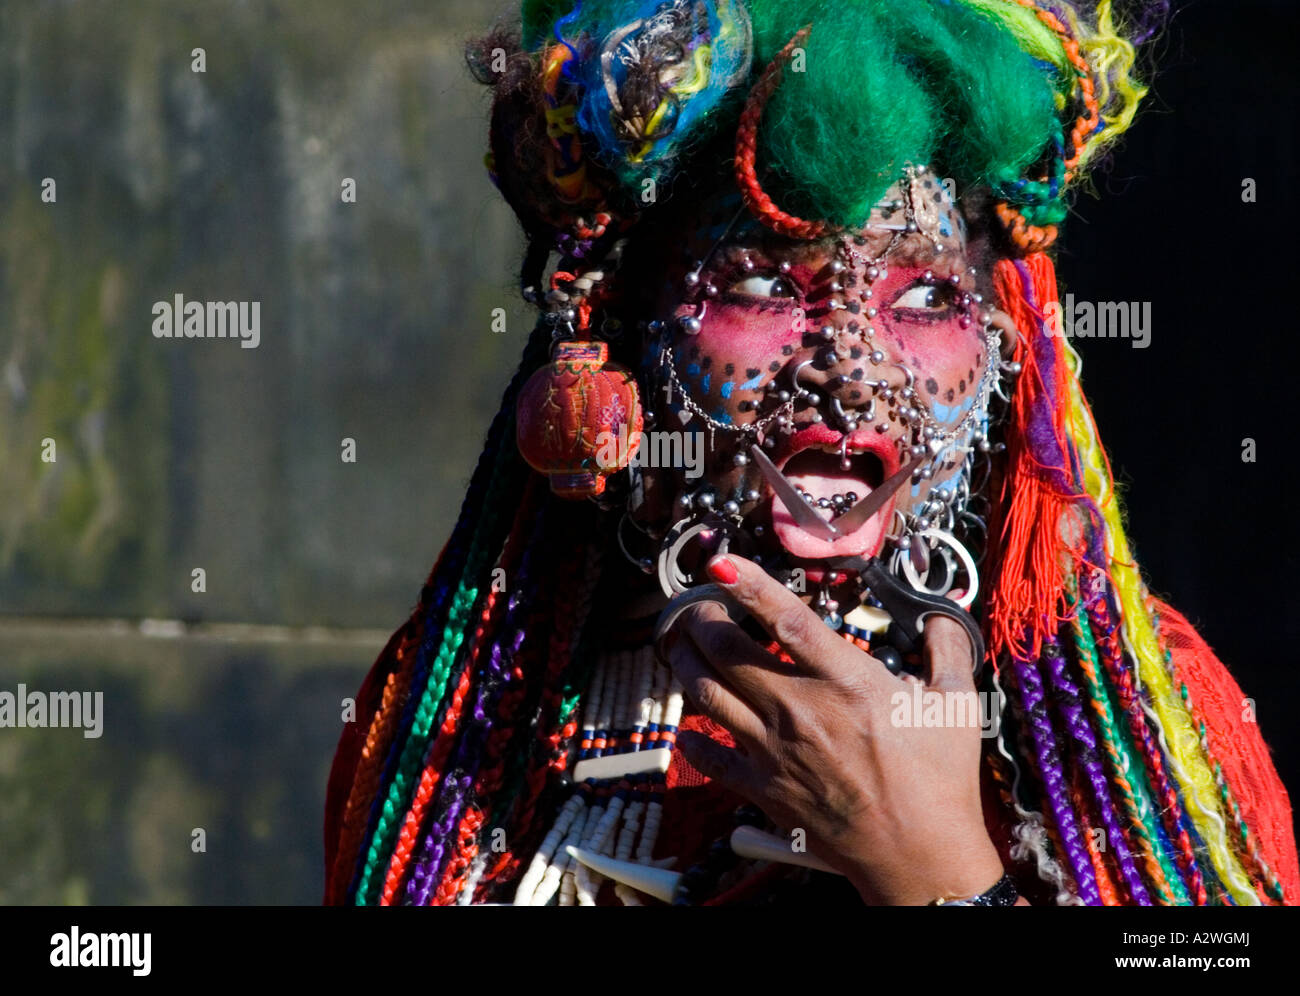 The world's most pierced woman at the Edinburgh festival fringe inserts a pair of scissors through her tongue, Scotland. Stock Photo